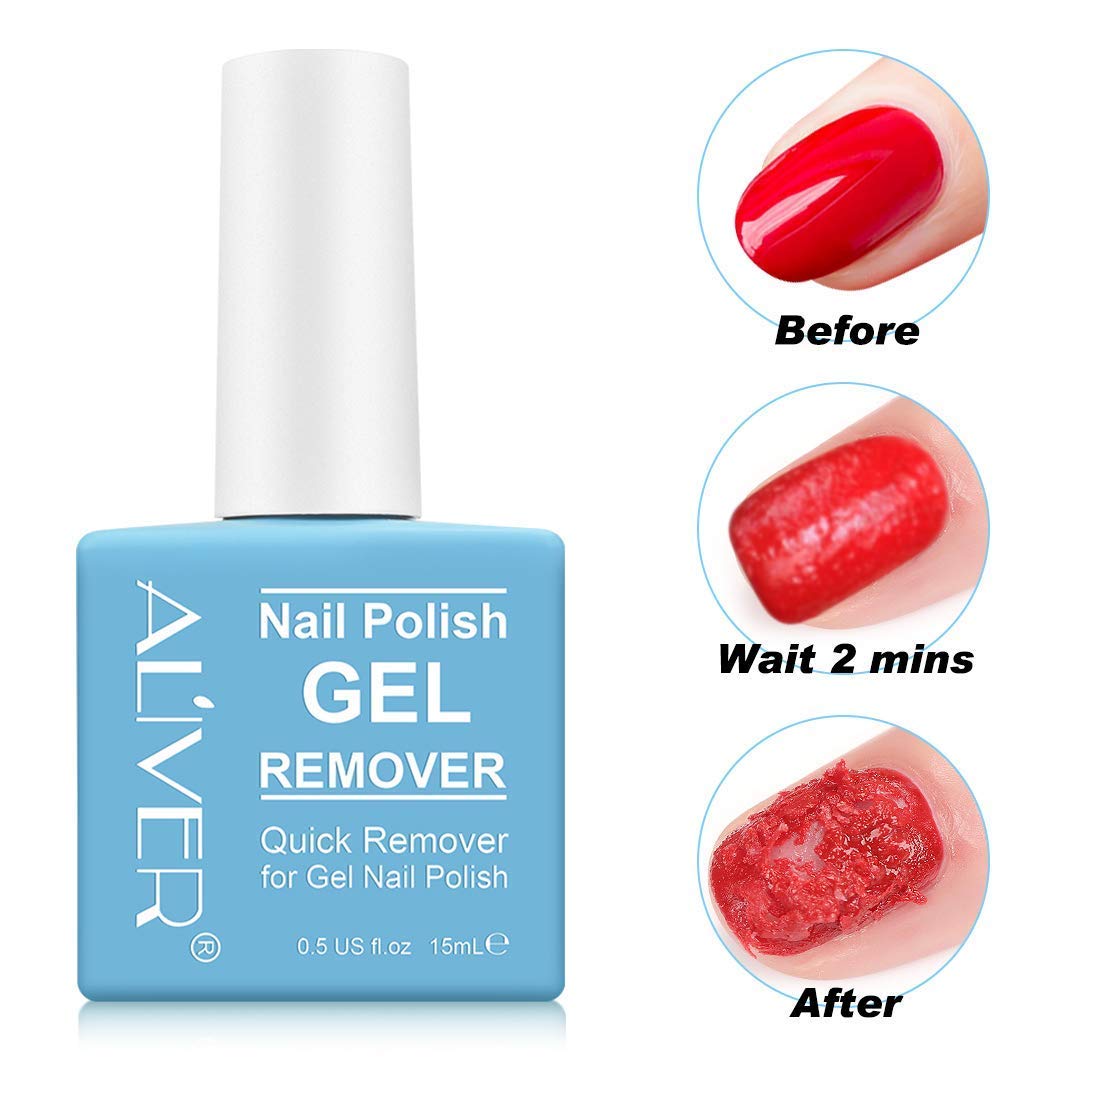 best Nail Polish Remover | Gel Nail Polish Remover (2 Pack) - Remove Gel Nail Polish Within 2-3 Minutes - Quick & Easy Polish Remover - No Need For Foil, Soaking Or Wrapping 0.5 Fl Oz